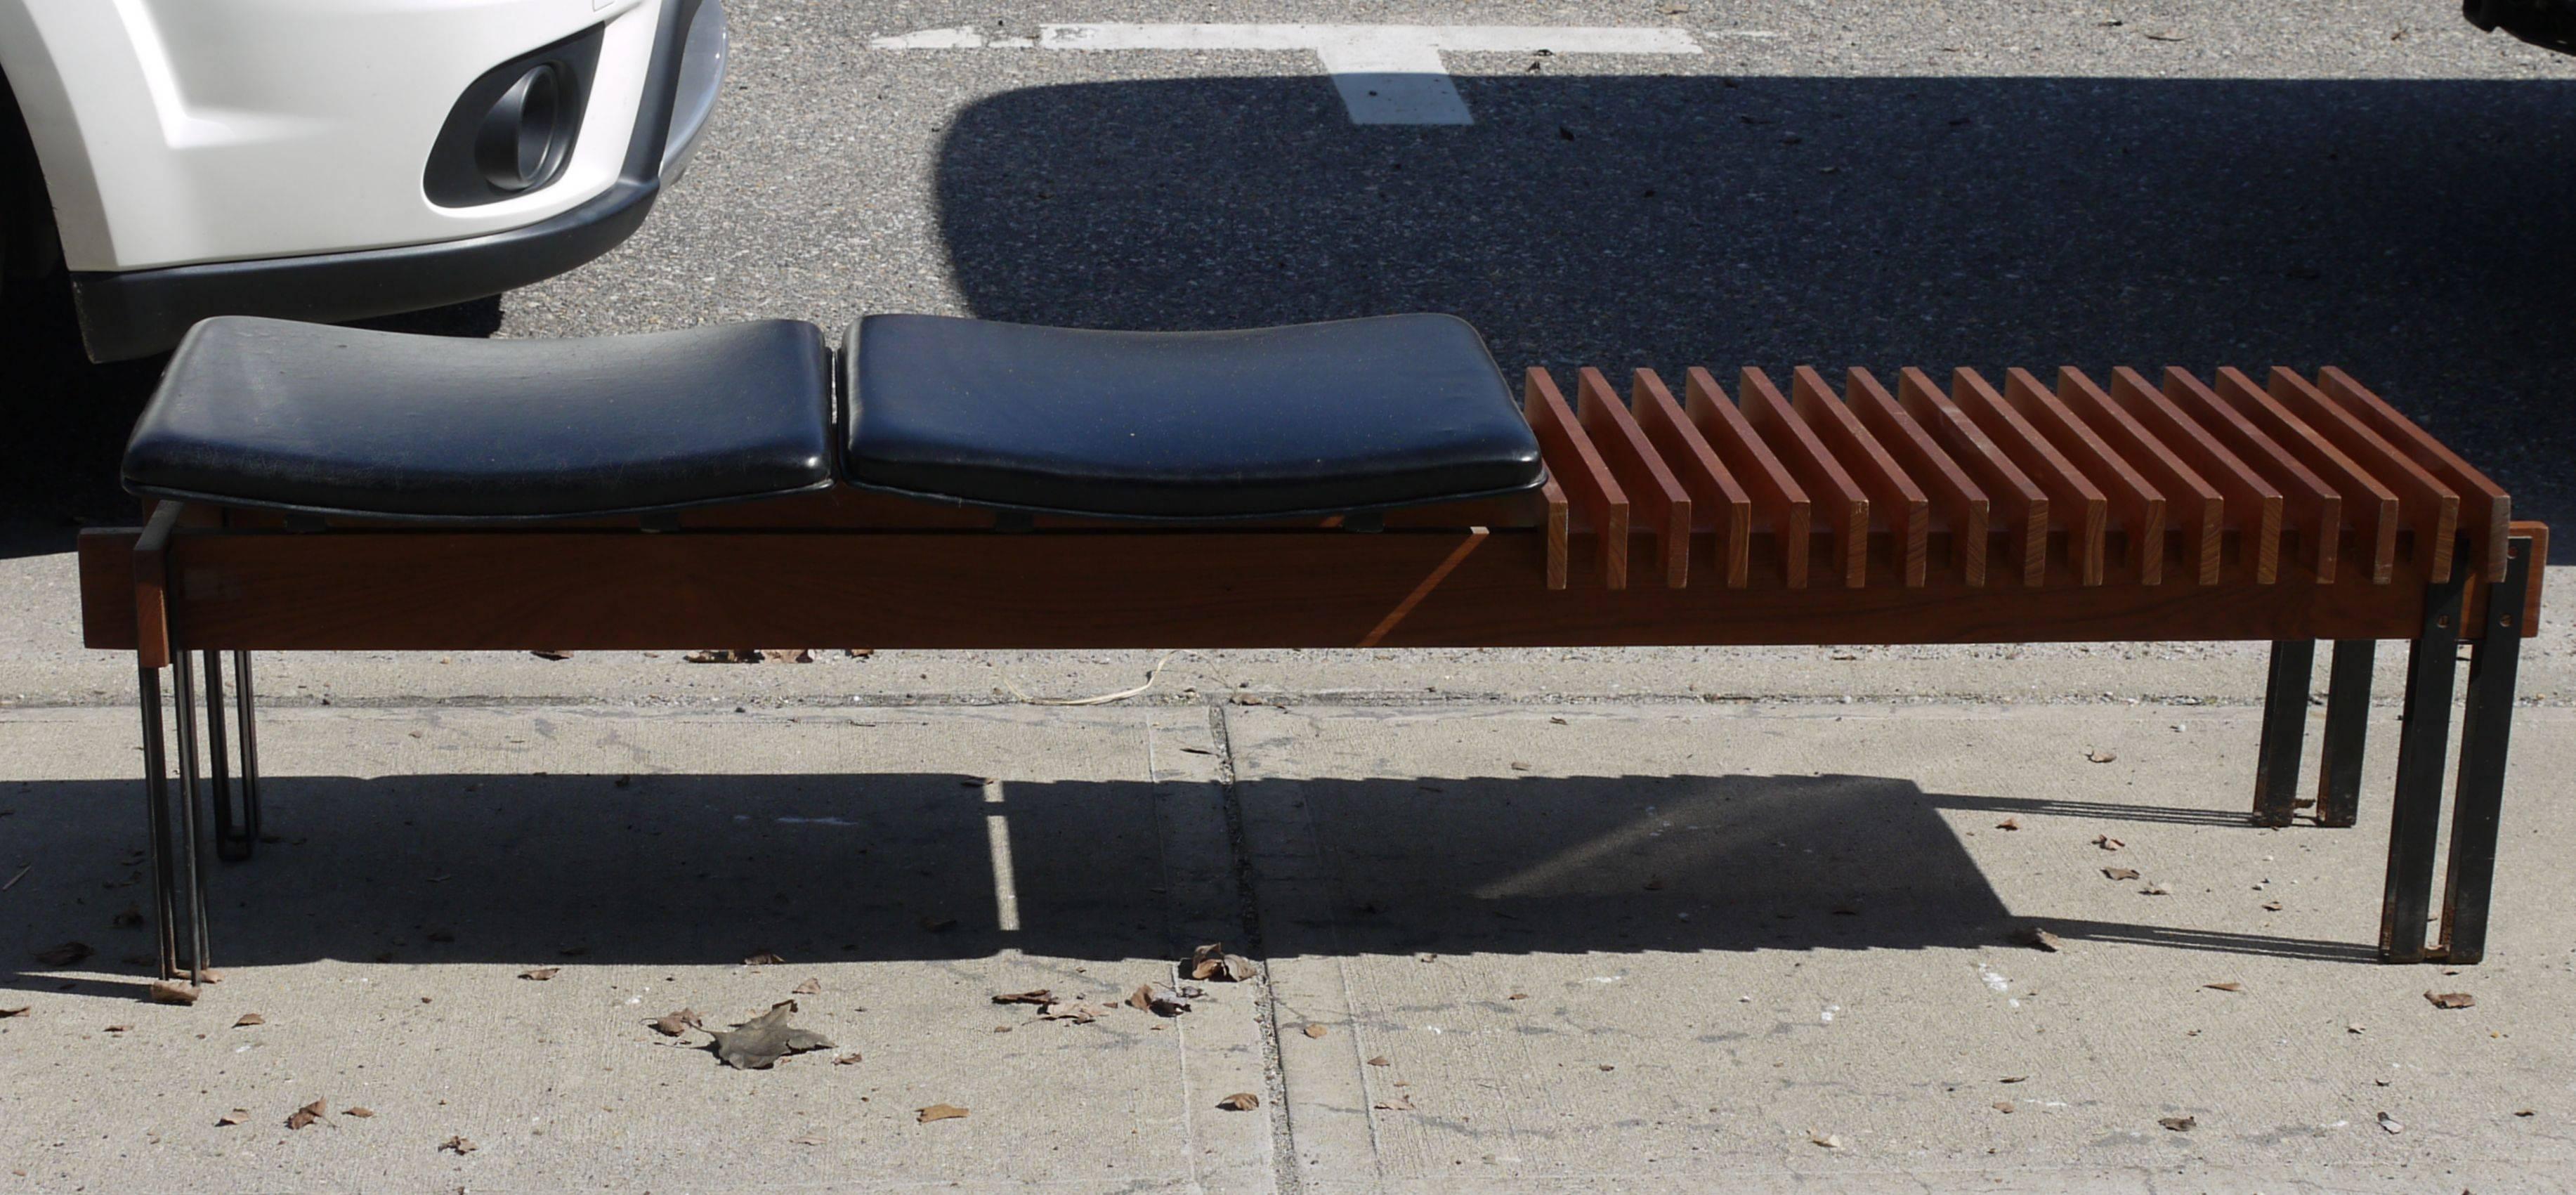 Mid-Century Modern bench constructed using teak on black metal legs with black leatherette seats. Iconic design from the 1960s.
 
Published in L'Arredamento Moderno, Settima Serie, Aloi, pg. 124.